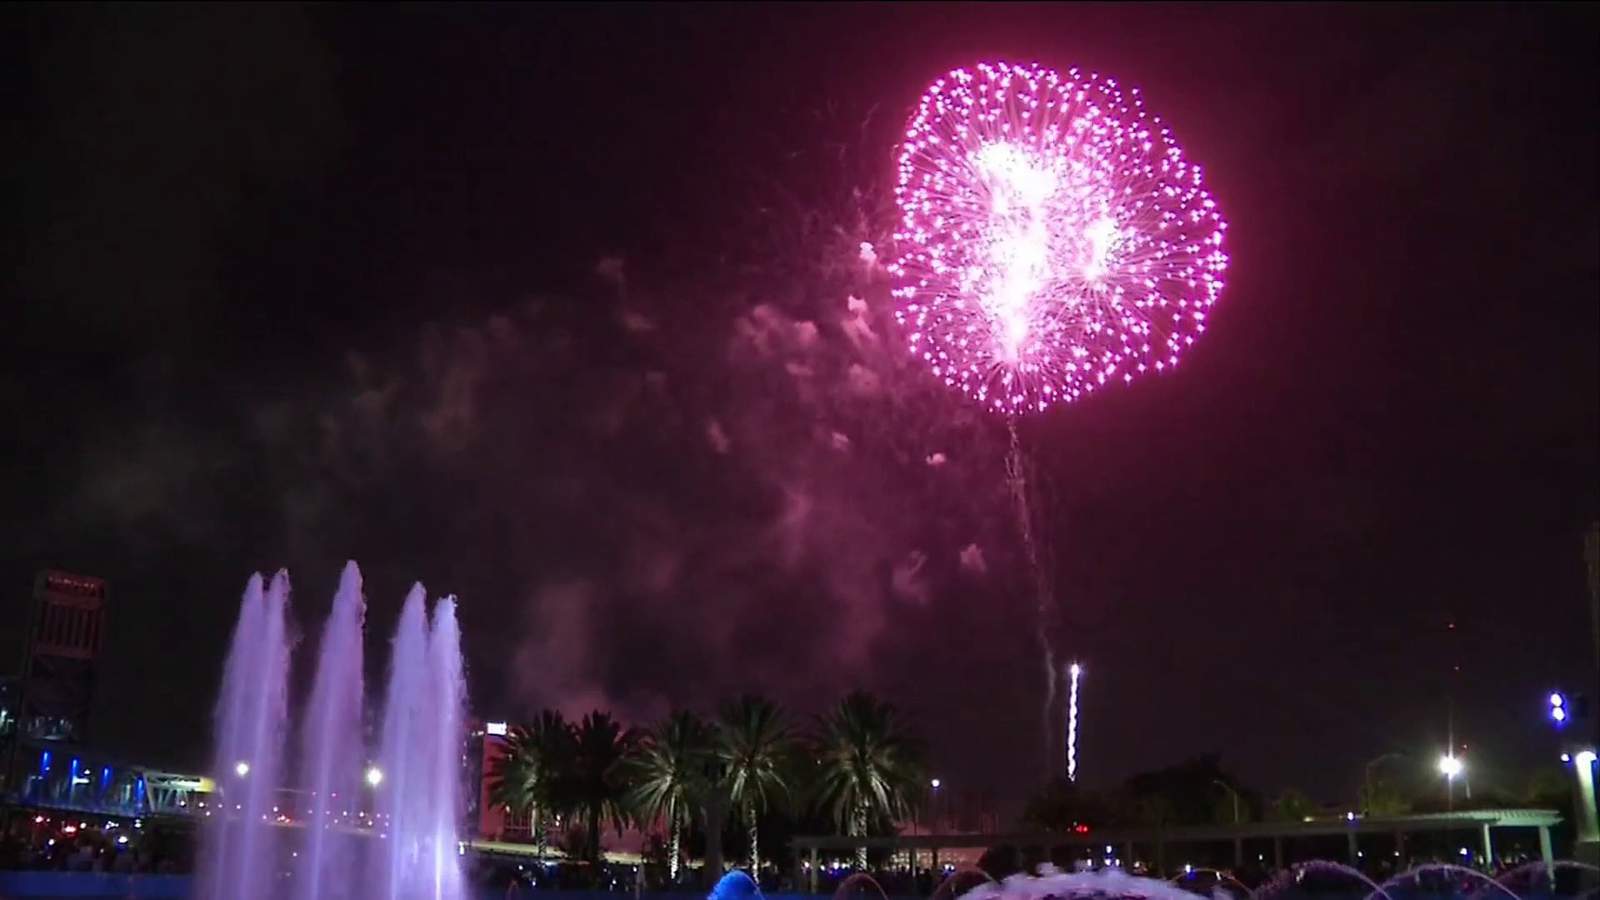 To promote social distancing, city to launch 4th of July fireworks from 6 spots